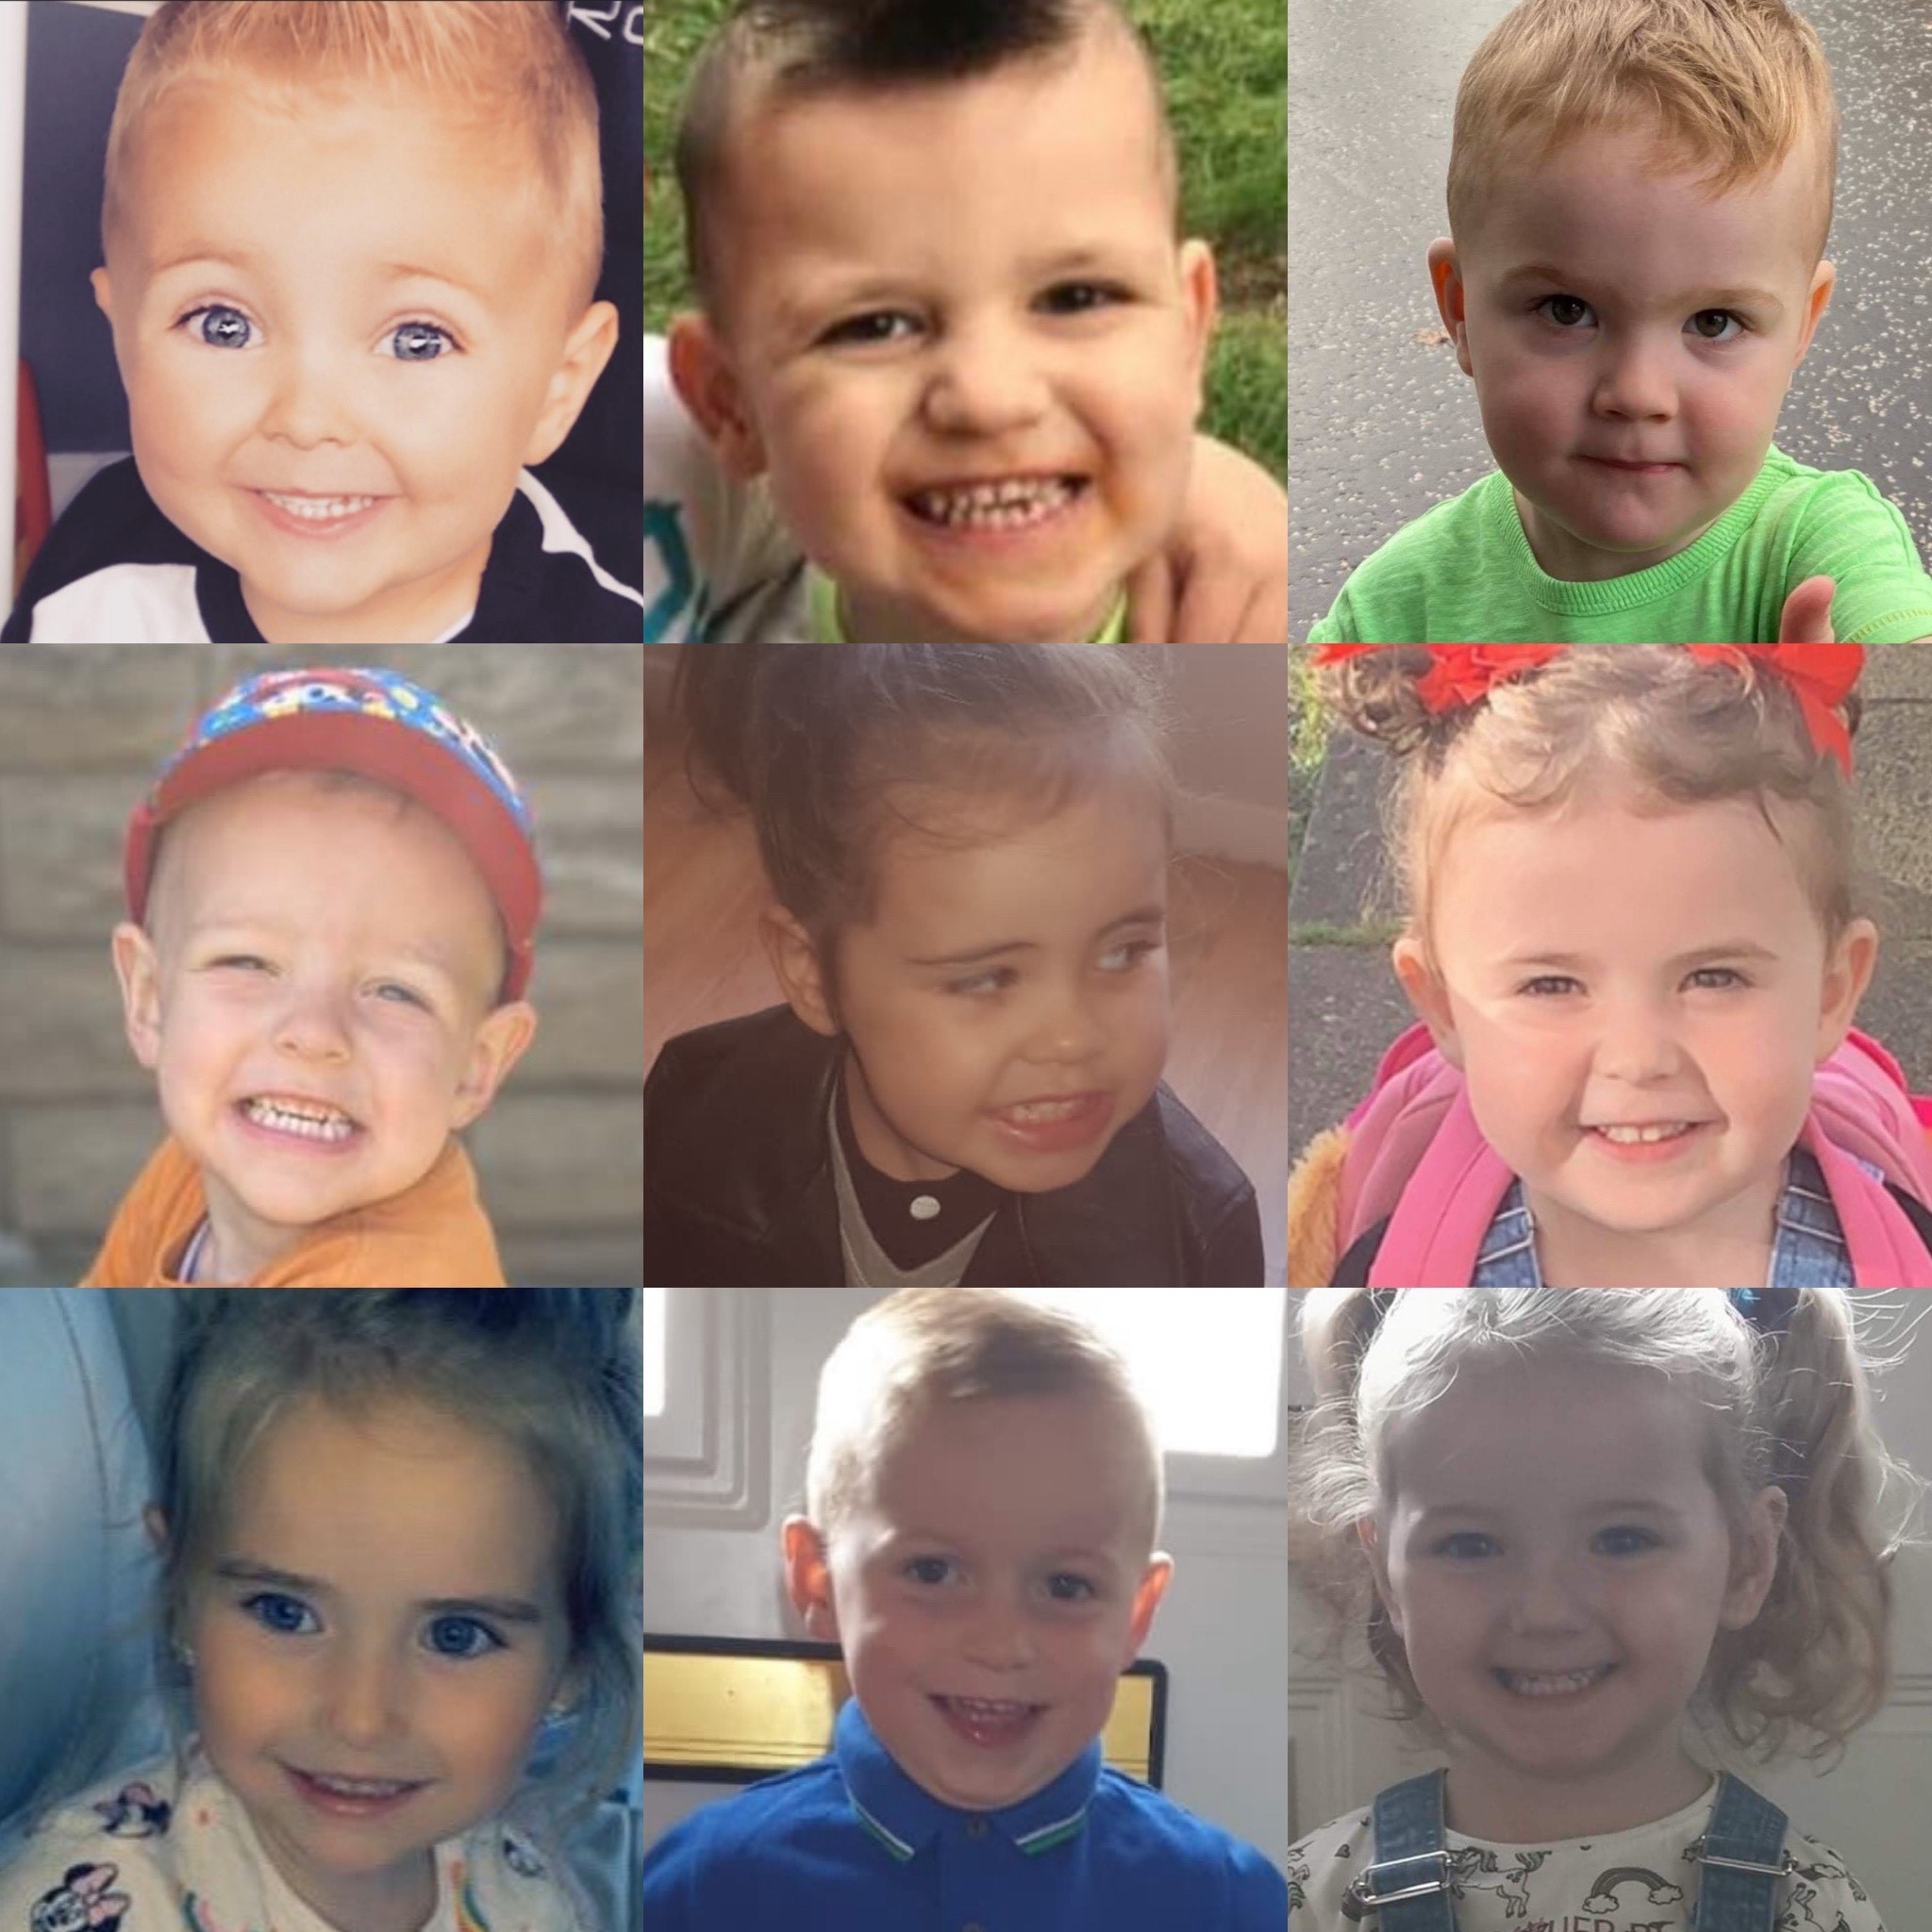 From top left, Finn Carson age 4, Neo Hodge Age 4, Keir Courts Age 3, Arlo Howieson Age 3, Aaliyah Foley Age 4, Ava-Rose Wilson Age 4, Gracie Beveridge Age 3, AJay O’Donnell Age 4 and Elyse Maxwell Age 3.